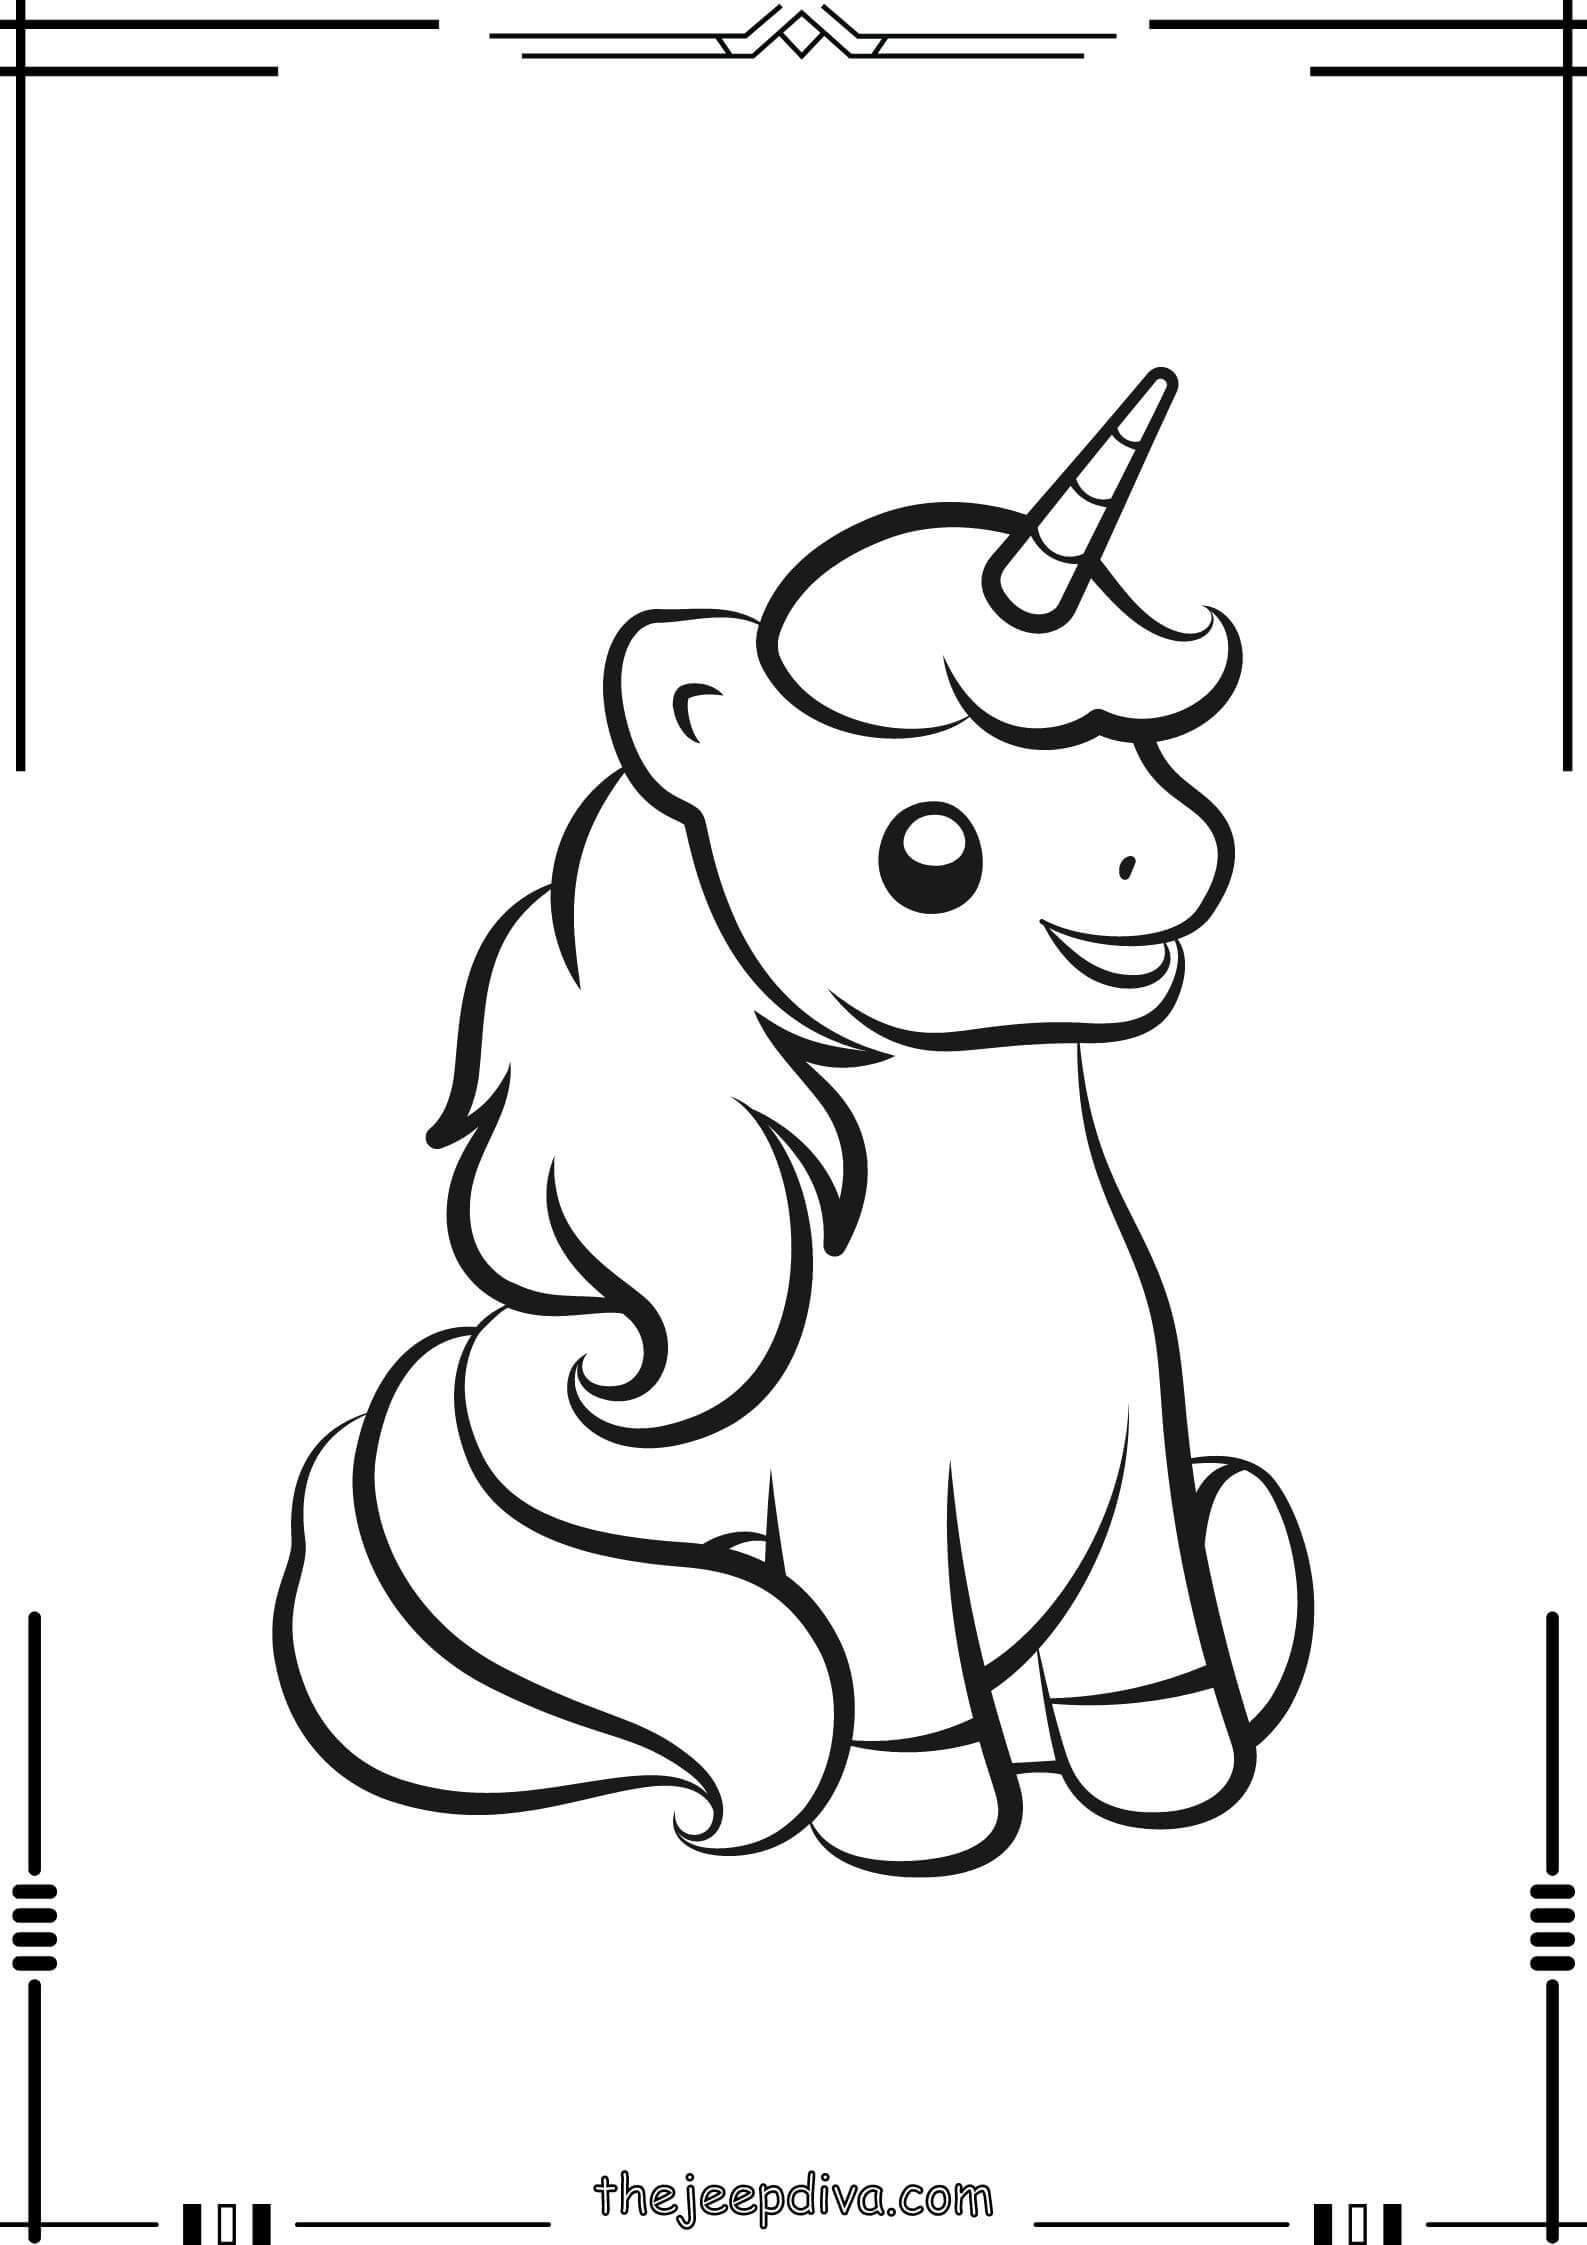 unicorn-coloring-page-easy-6